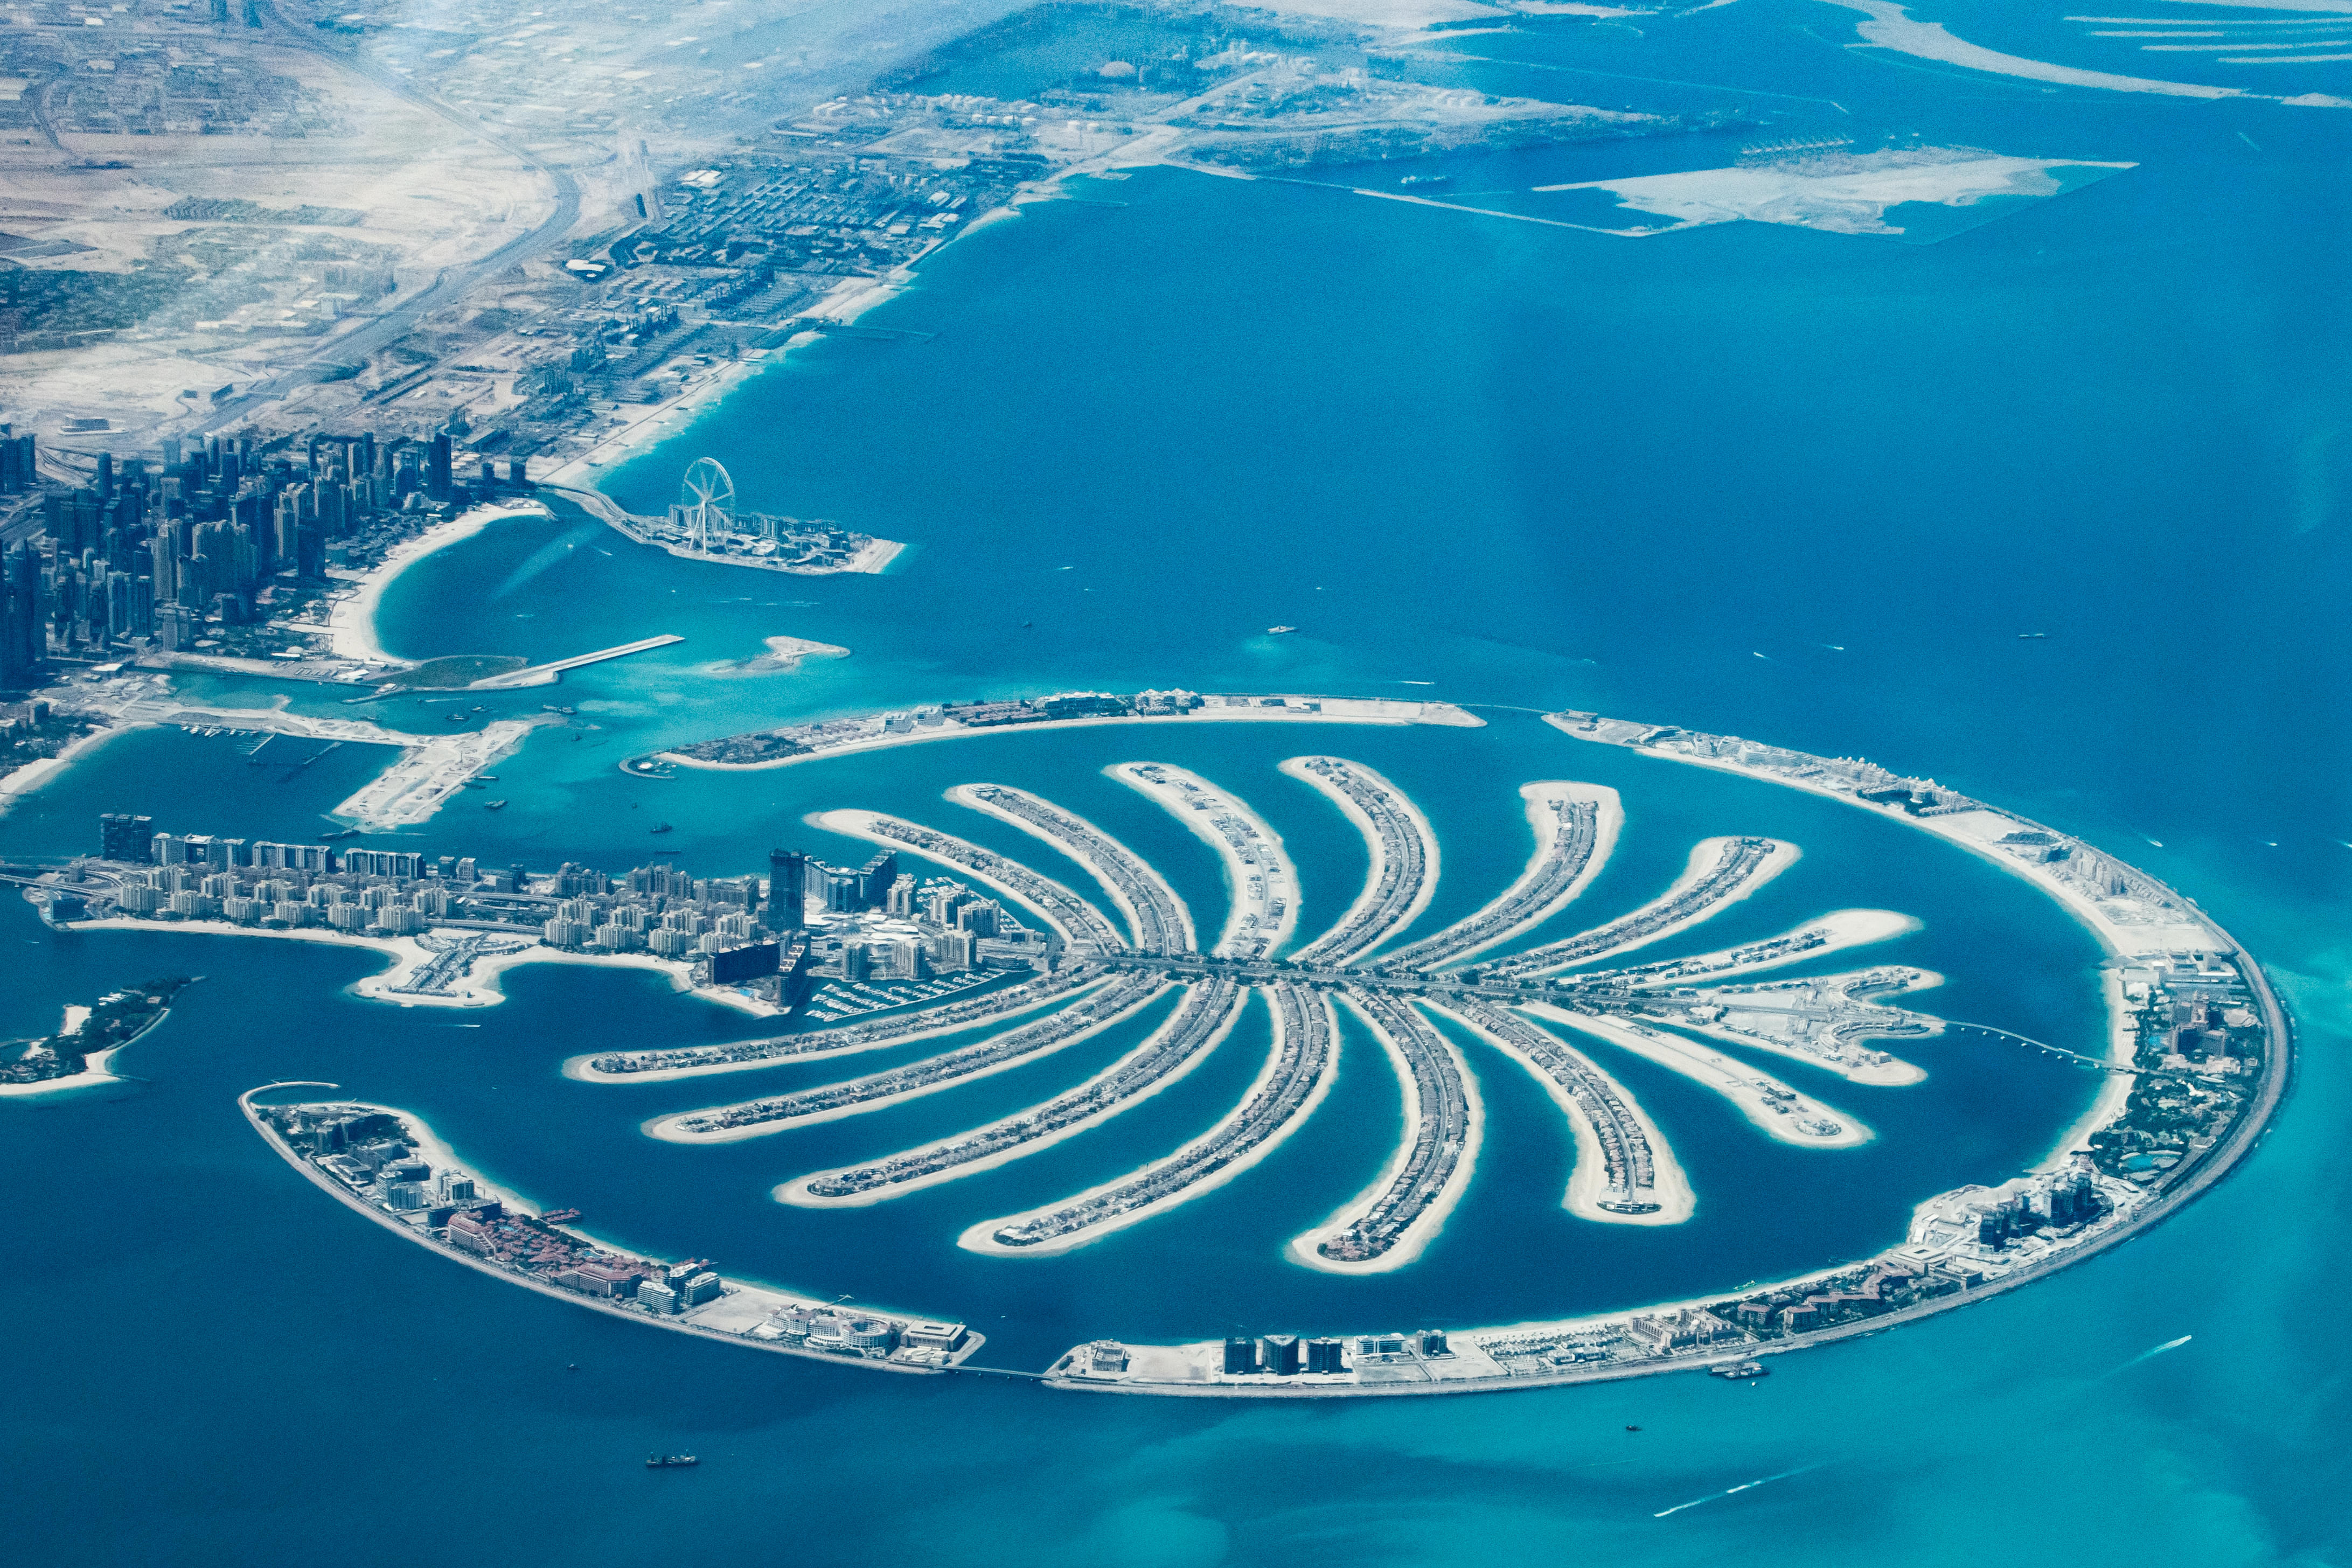 Places to visit in Palm Jumeirah